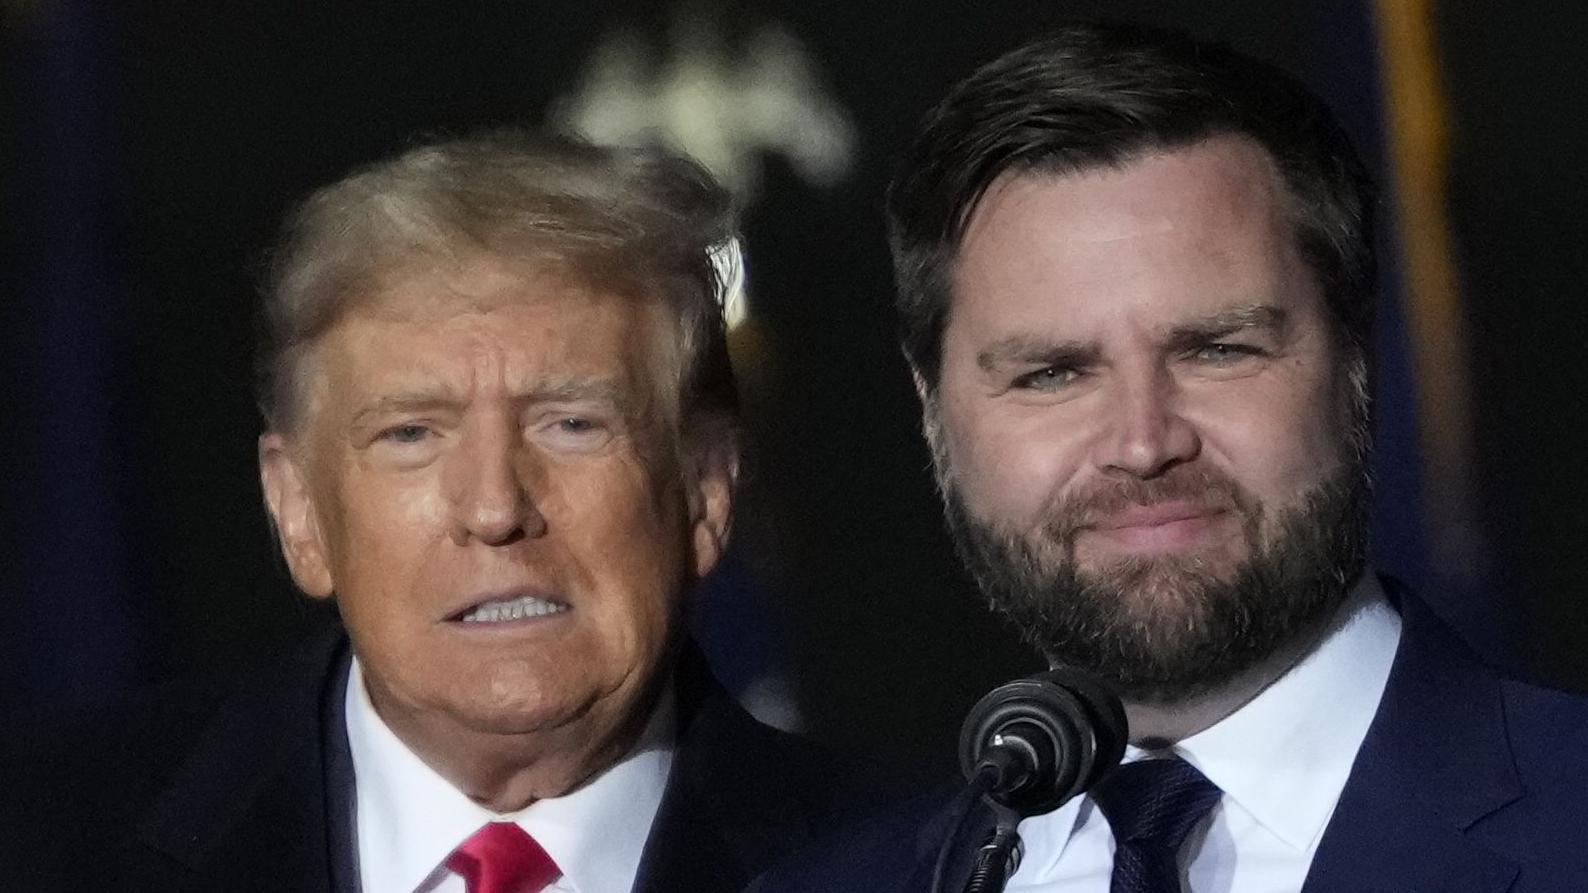 JD Vance named as Trumps running mate